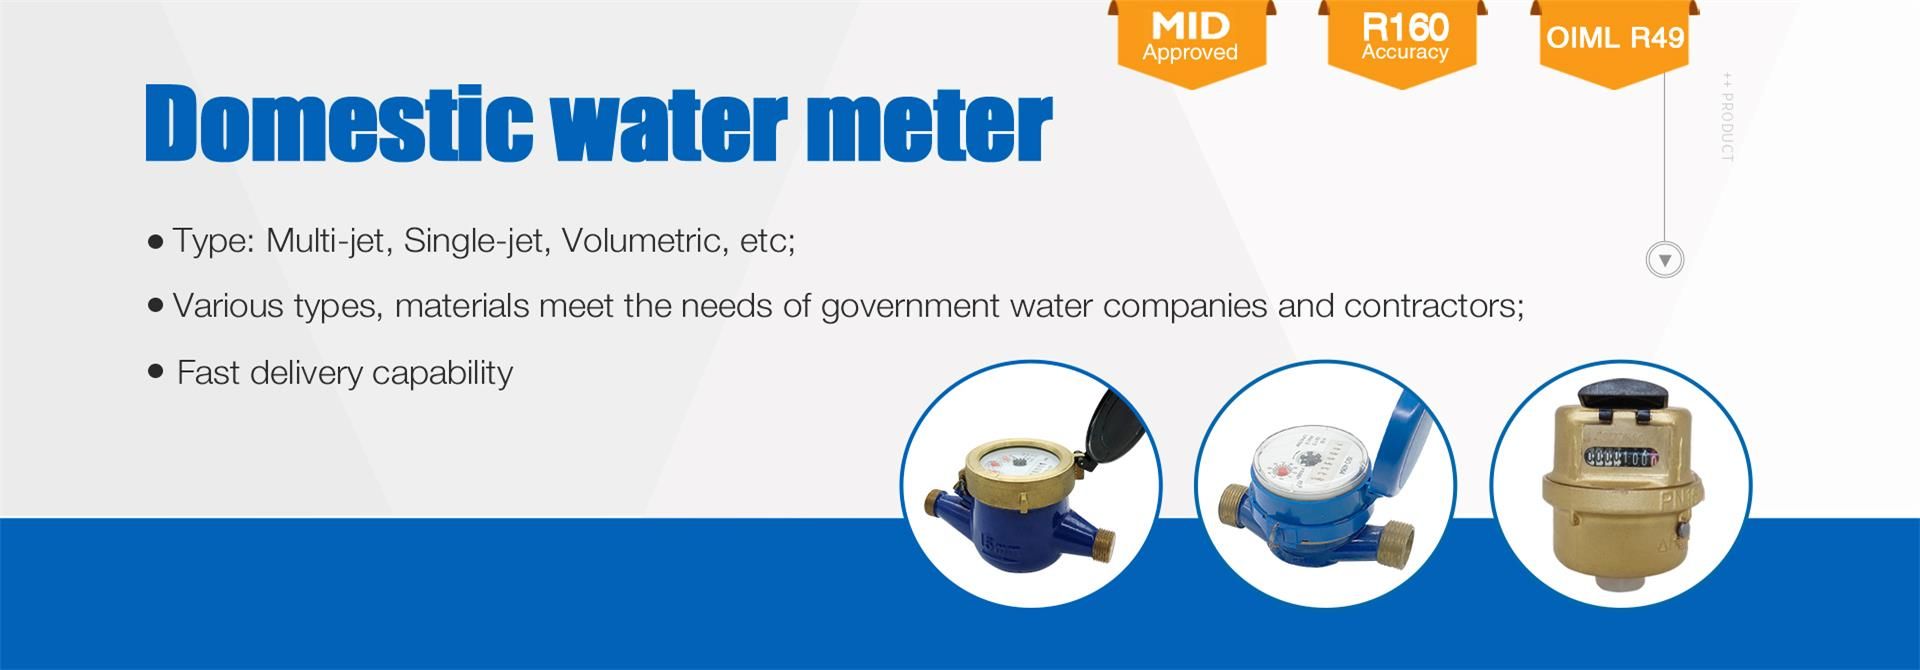 What misunderstandings are easy to fall into in the selection of water meters?